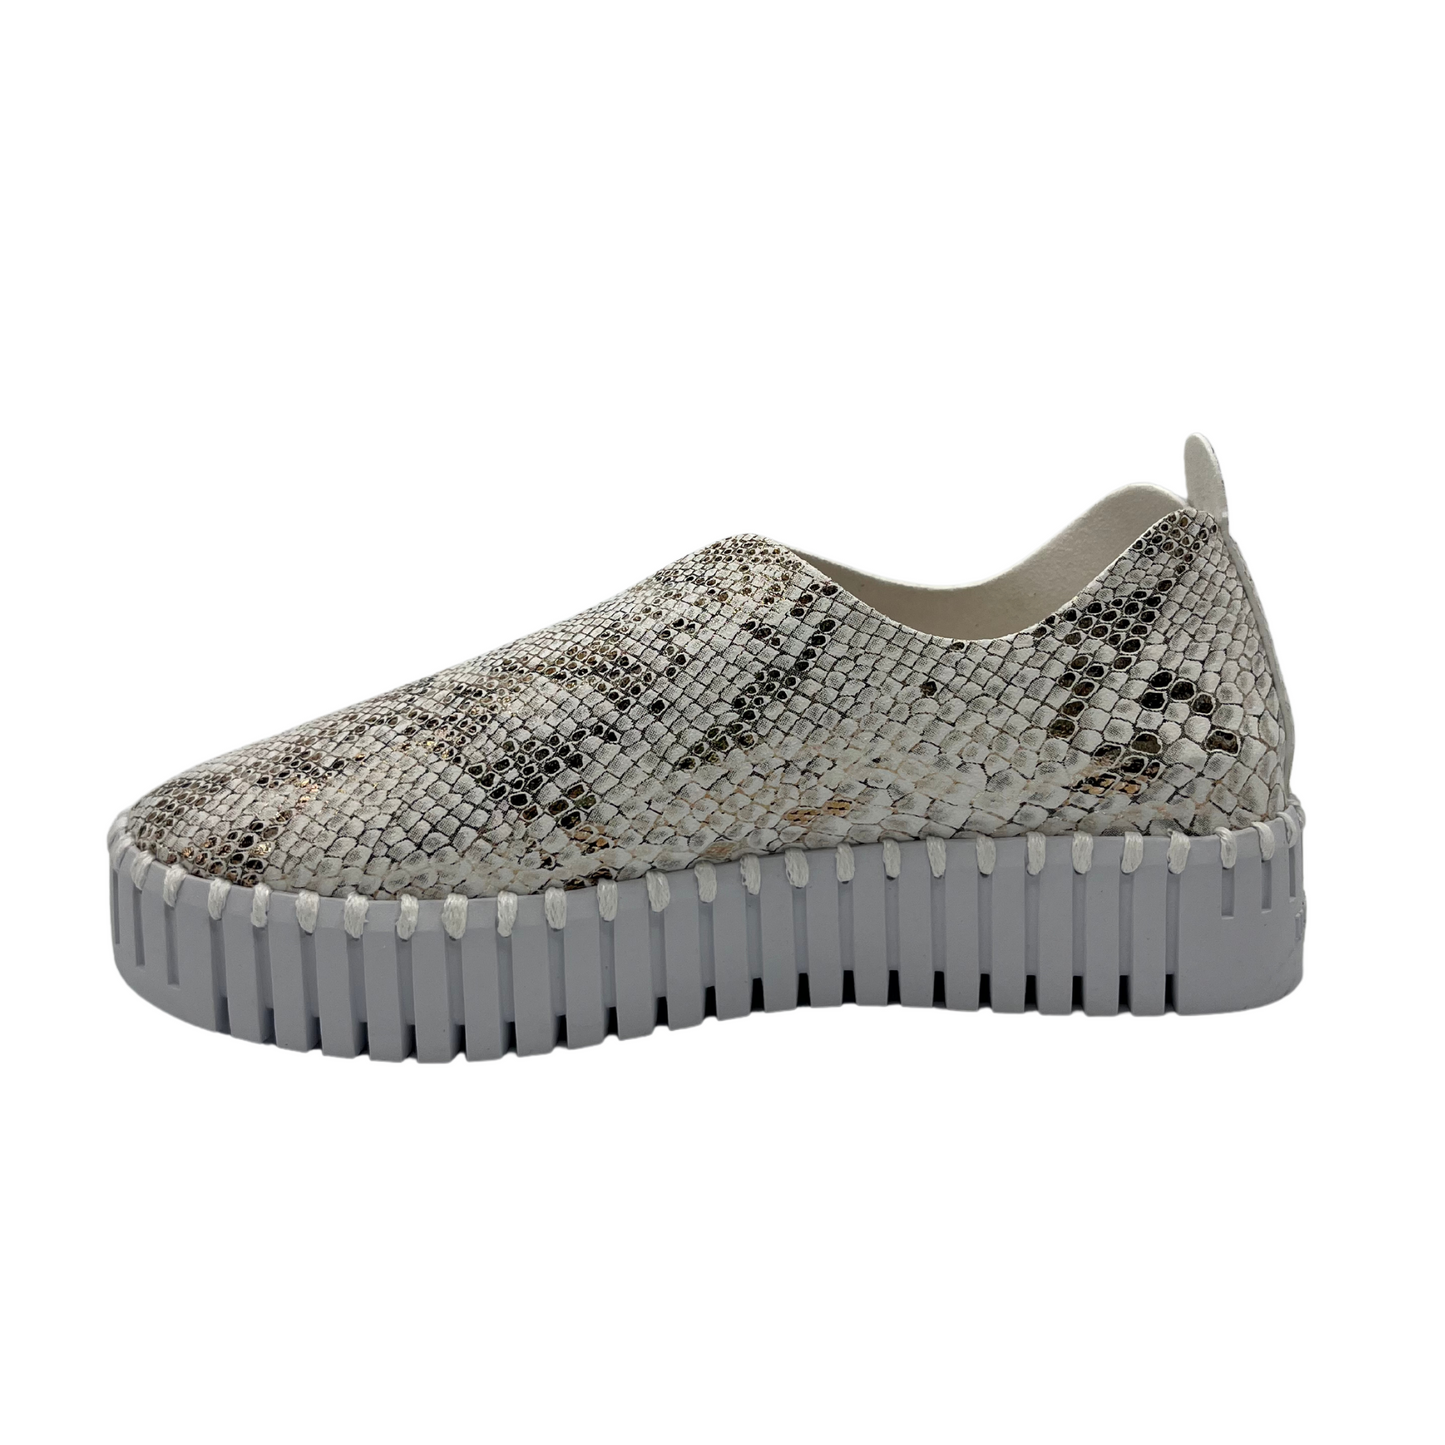 Left facing view of leather snake print sneaker with platform white rubber outsole